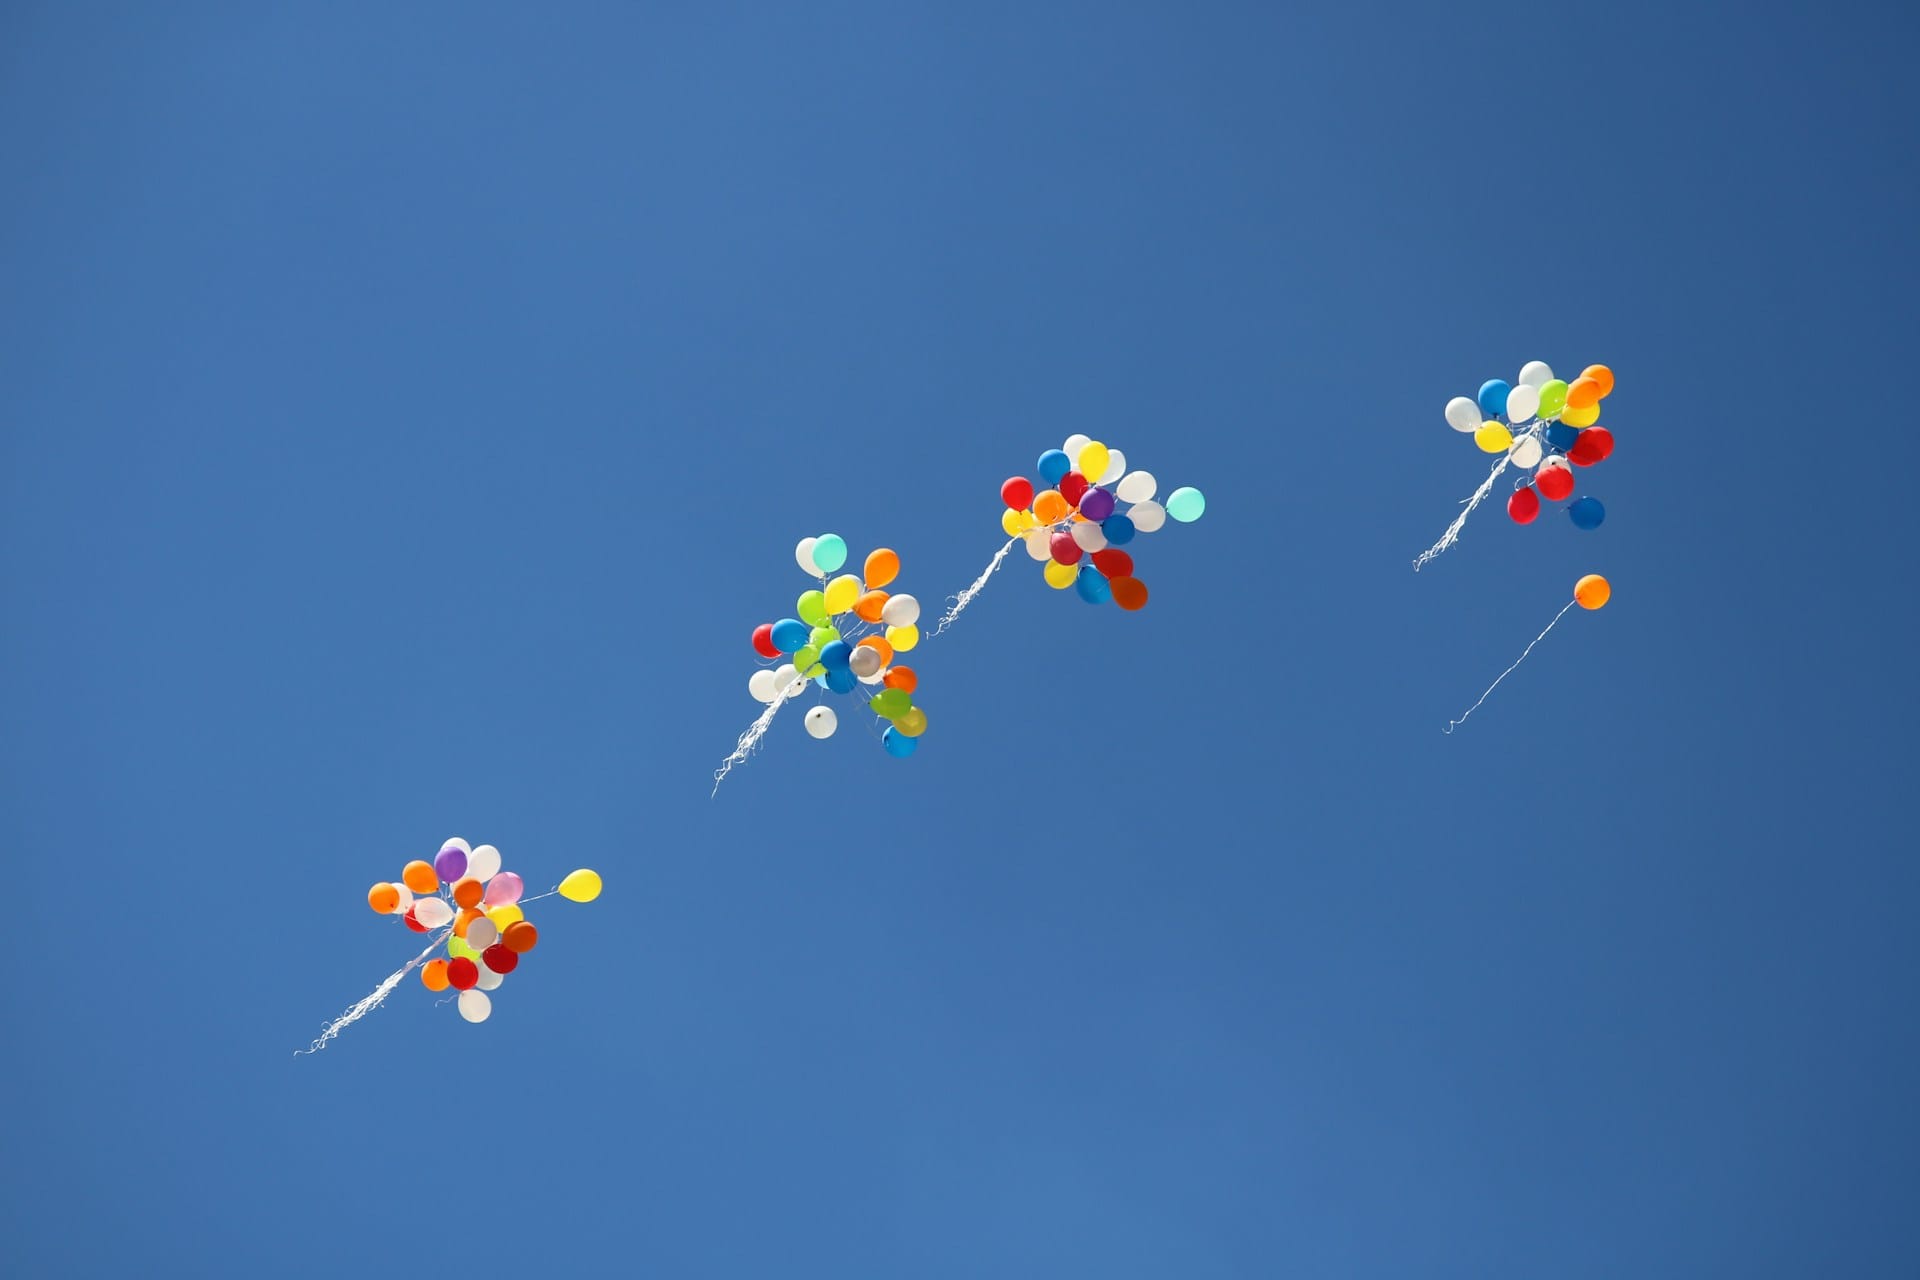 clusters of balloons flying away in a blue sky